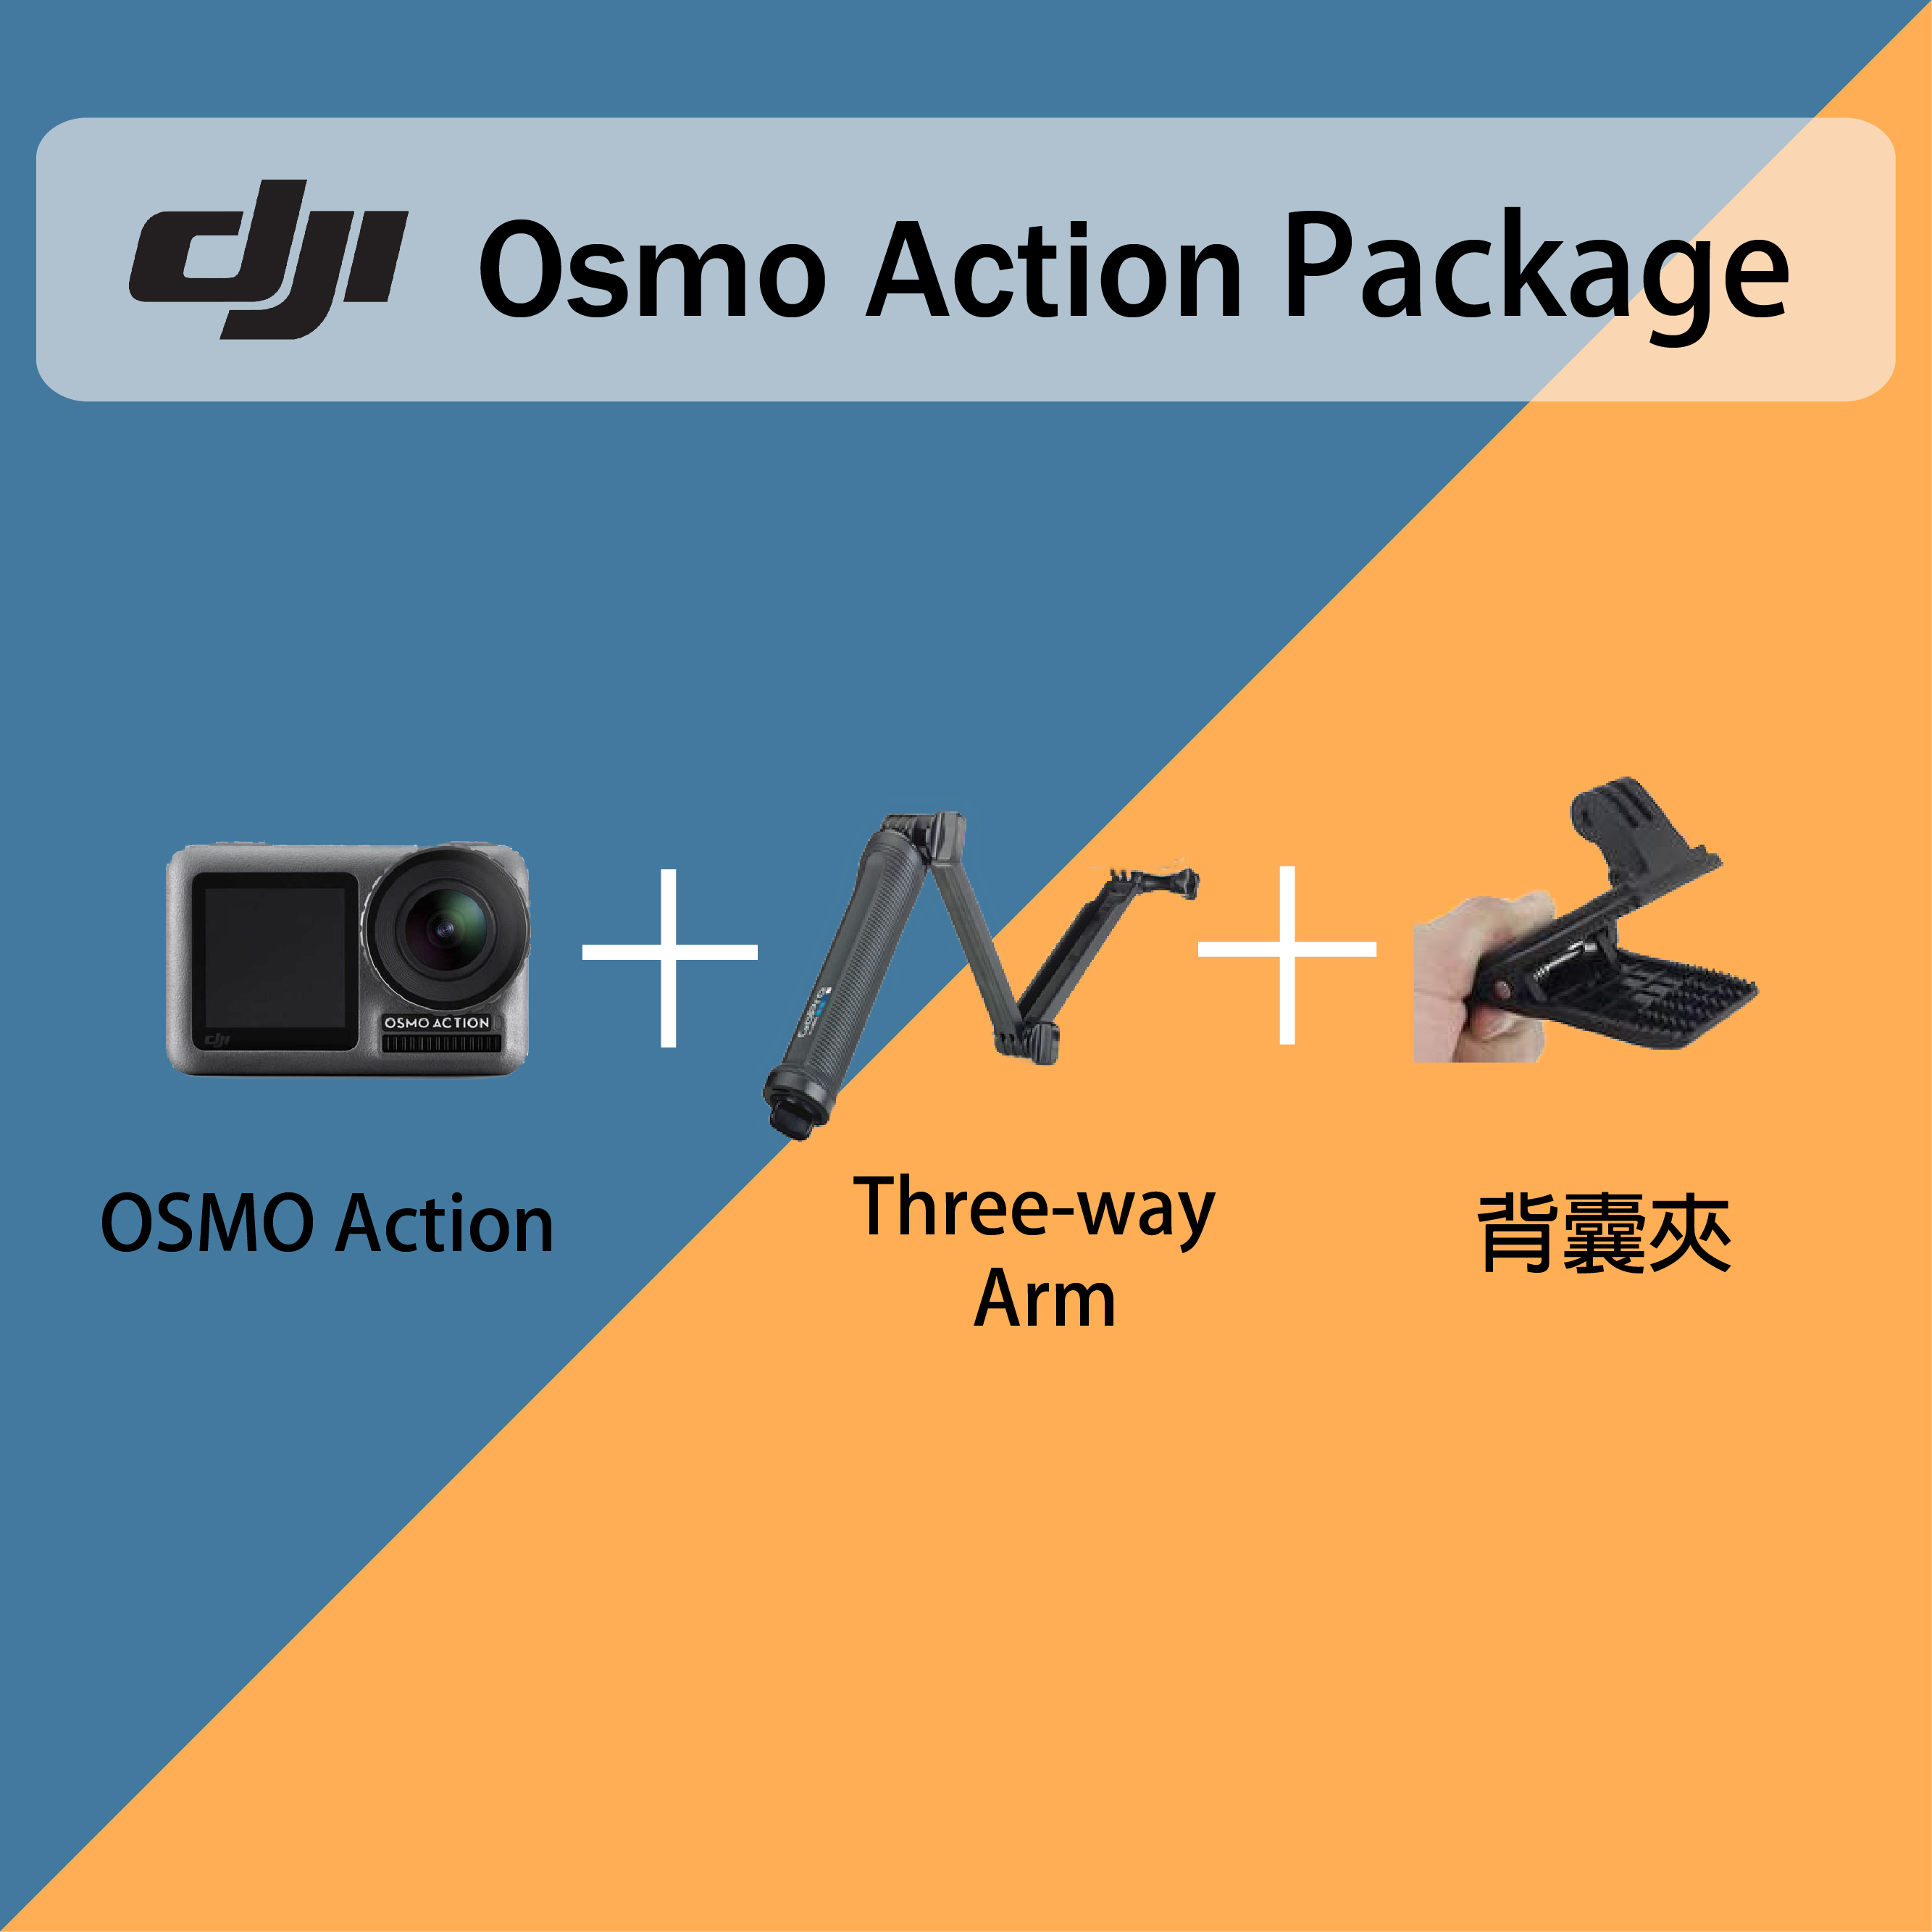 Osmo Action Package